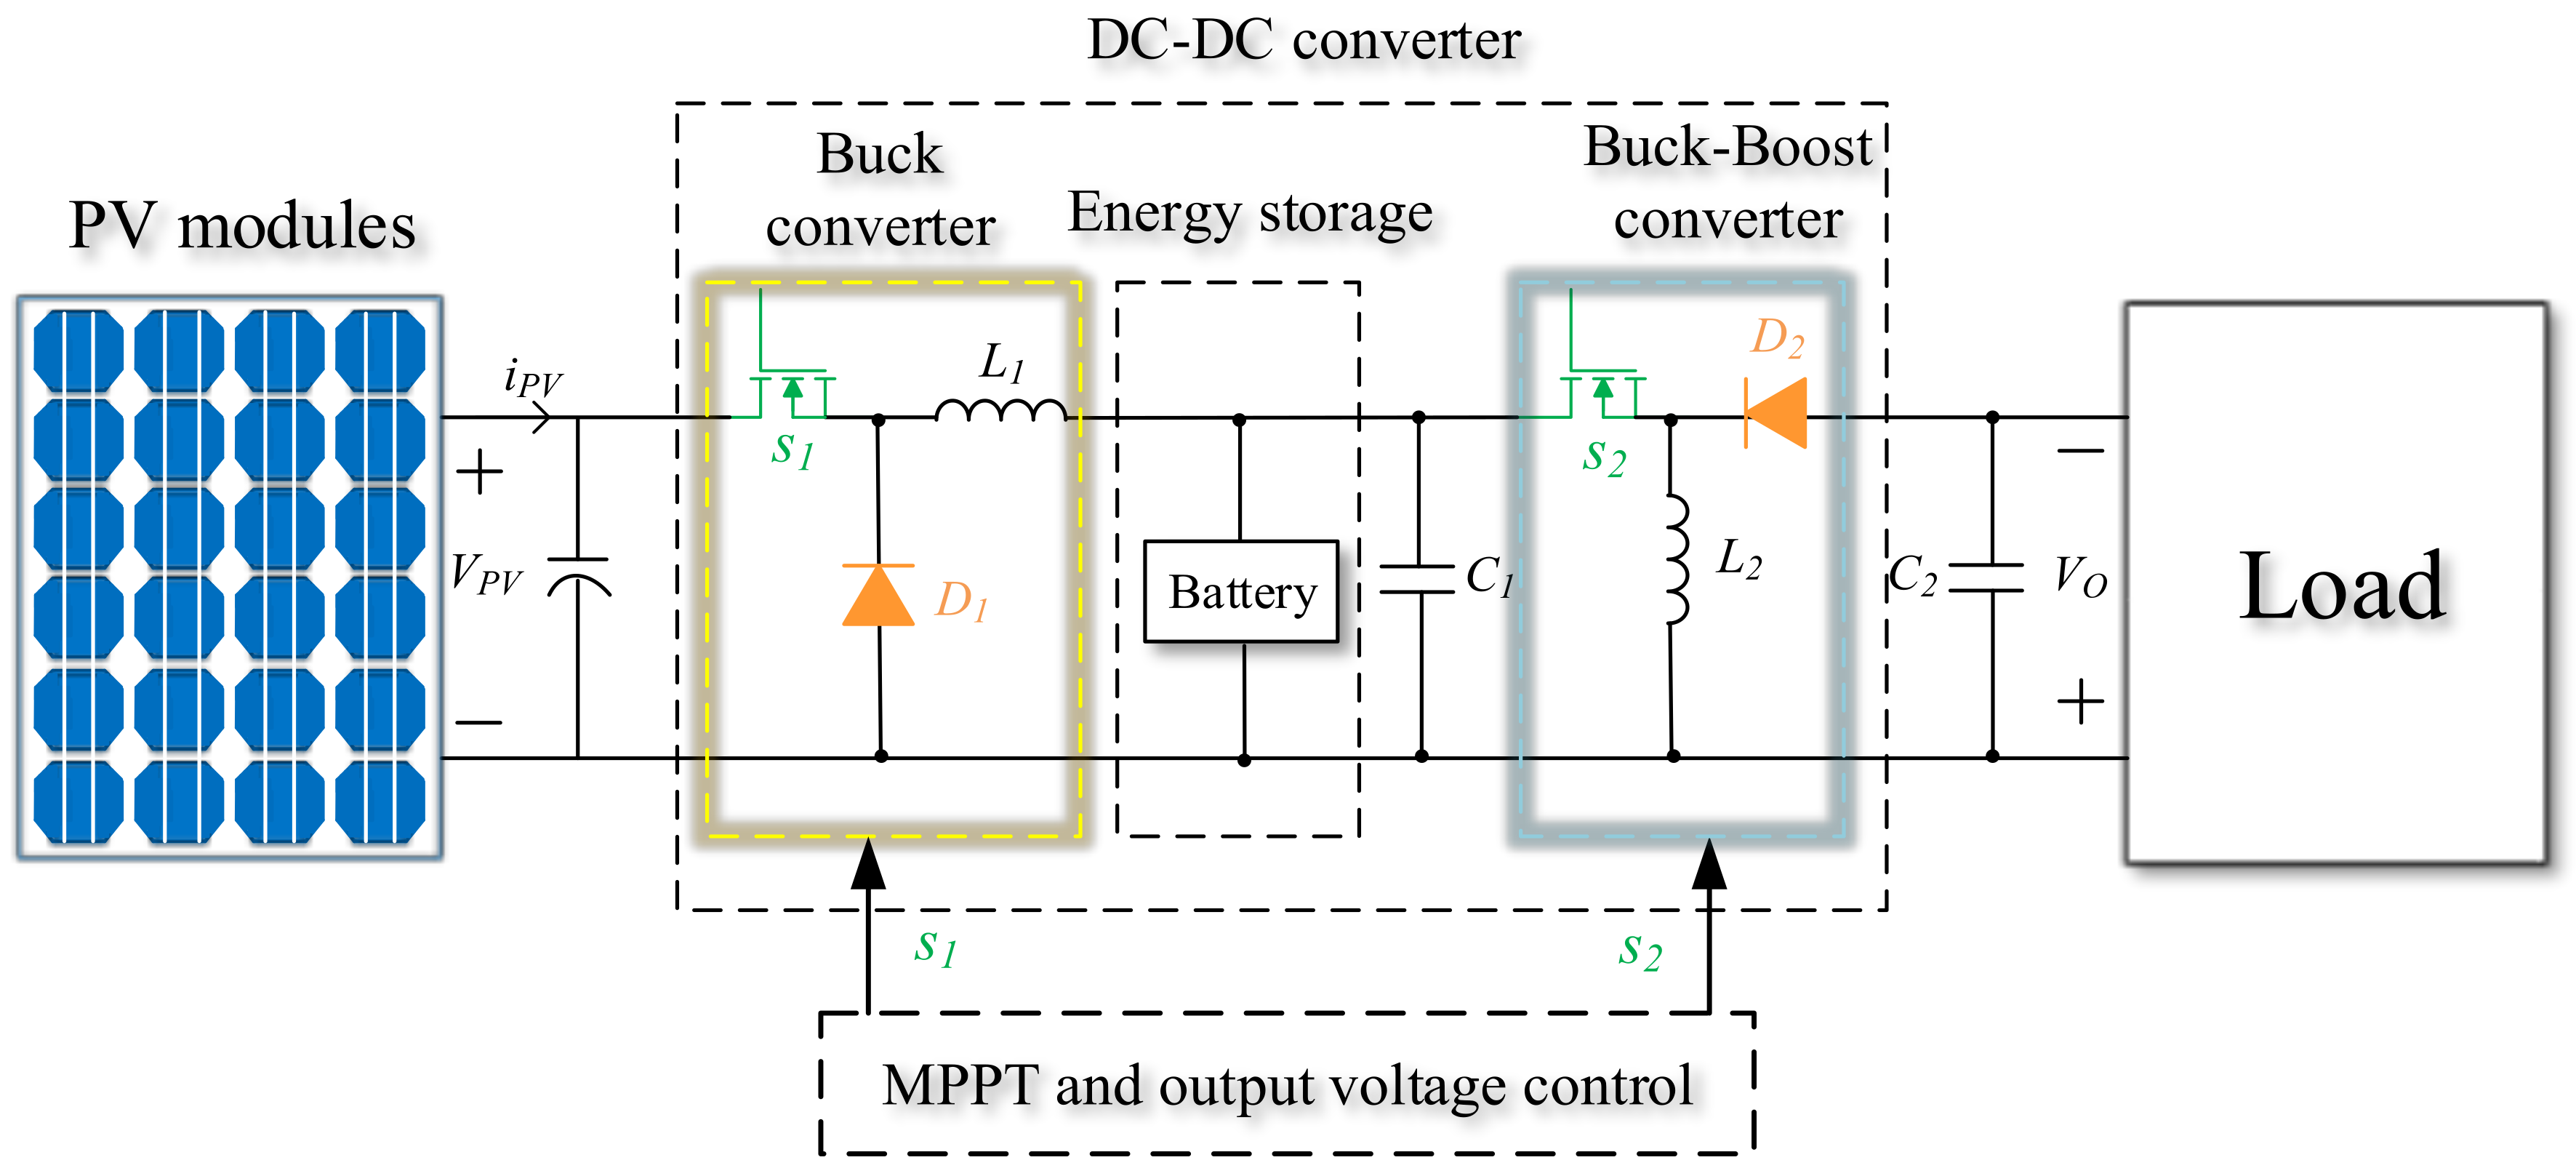 Energies | Free Full-Text | Service Continuity of PV Synchronous Buck/Buck-Boost  Converter with Energy Storage† | HTML